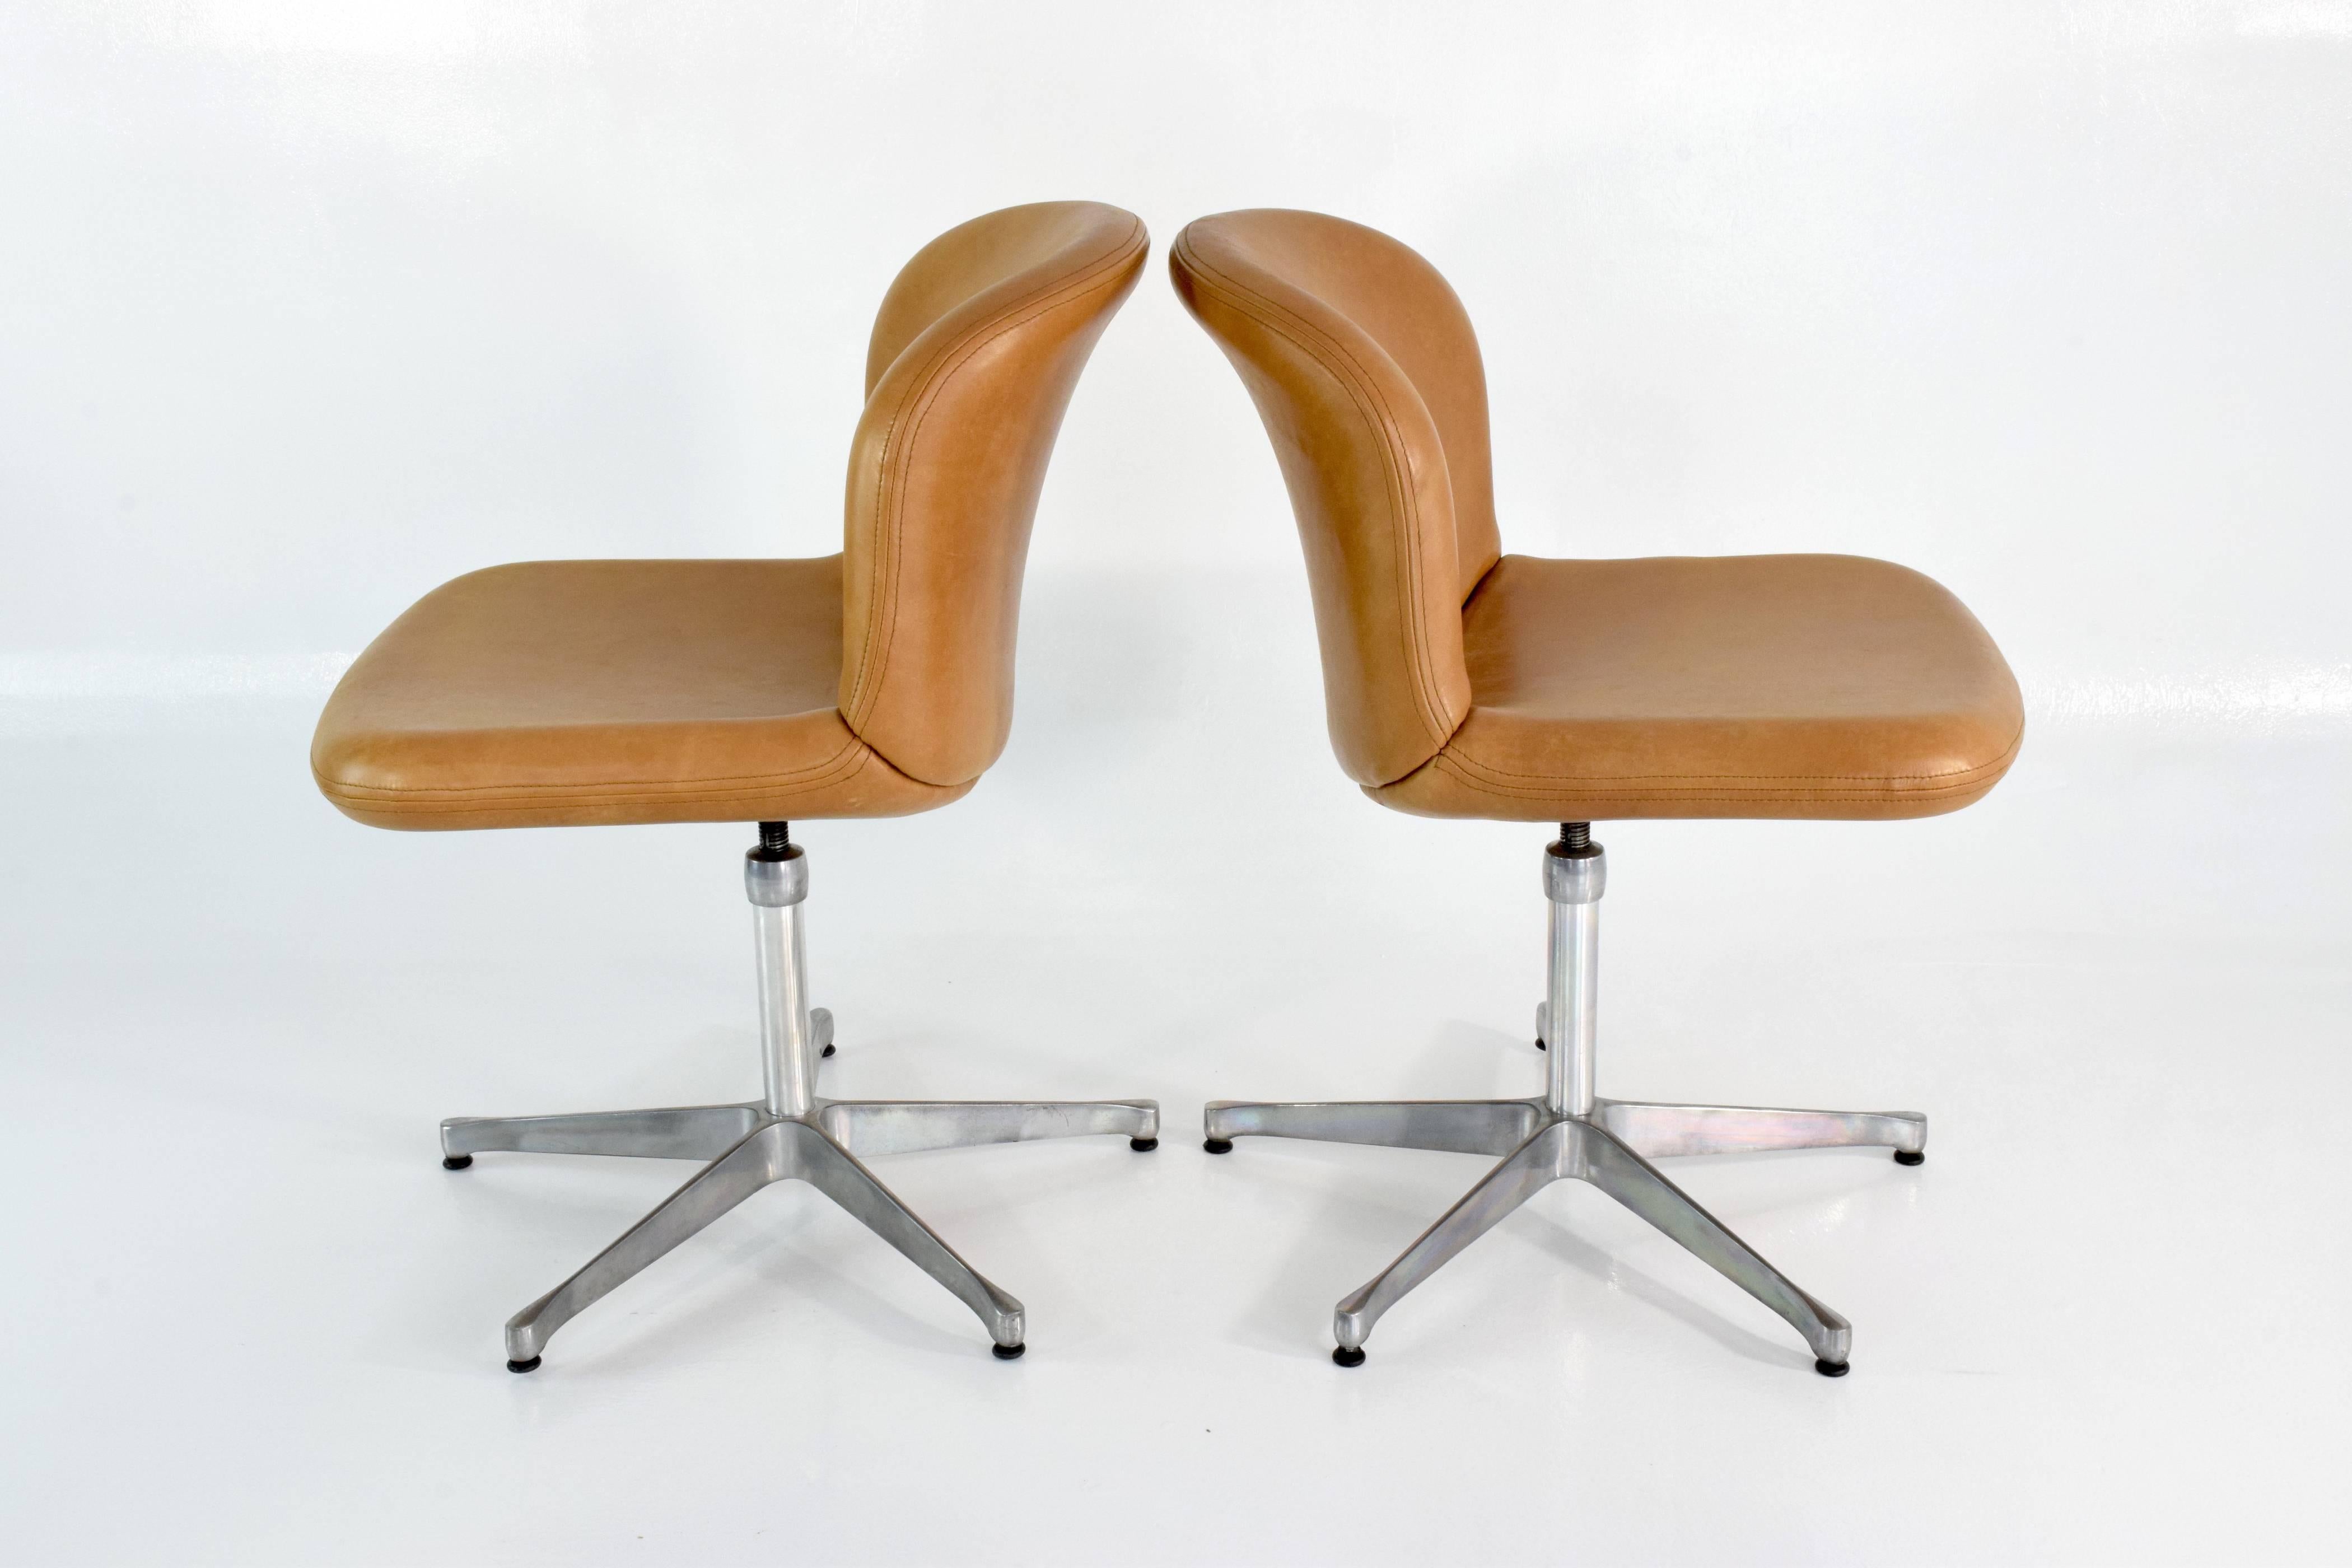 A timeless pair of 20th century vintage Italian Ico Parisi desk chairs designed with an aluminium swivel base with rollers and adjustable height. These office chairs have been fully restored: re-upholstered with Italian leather and re-polished base.